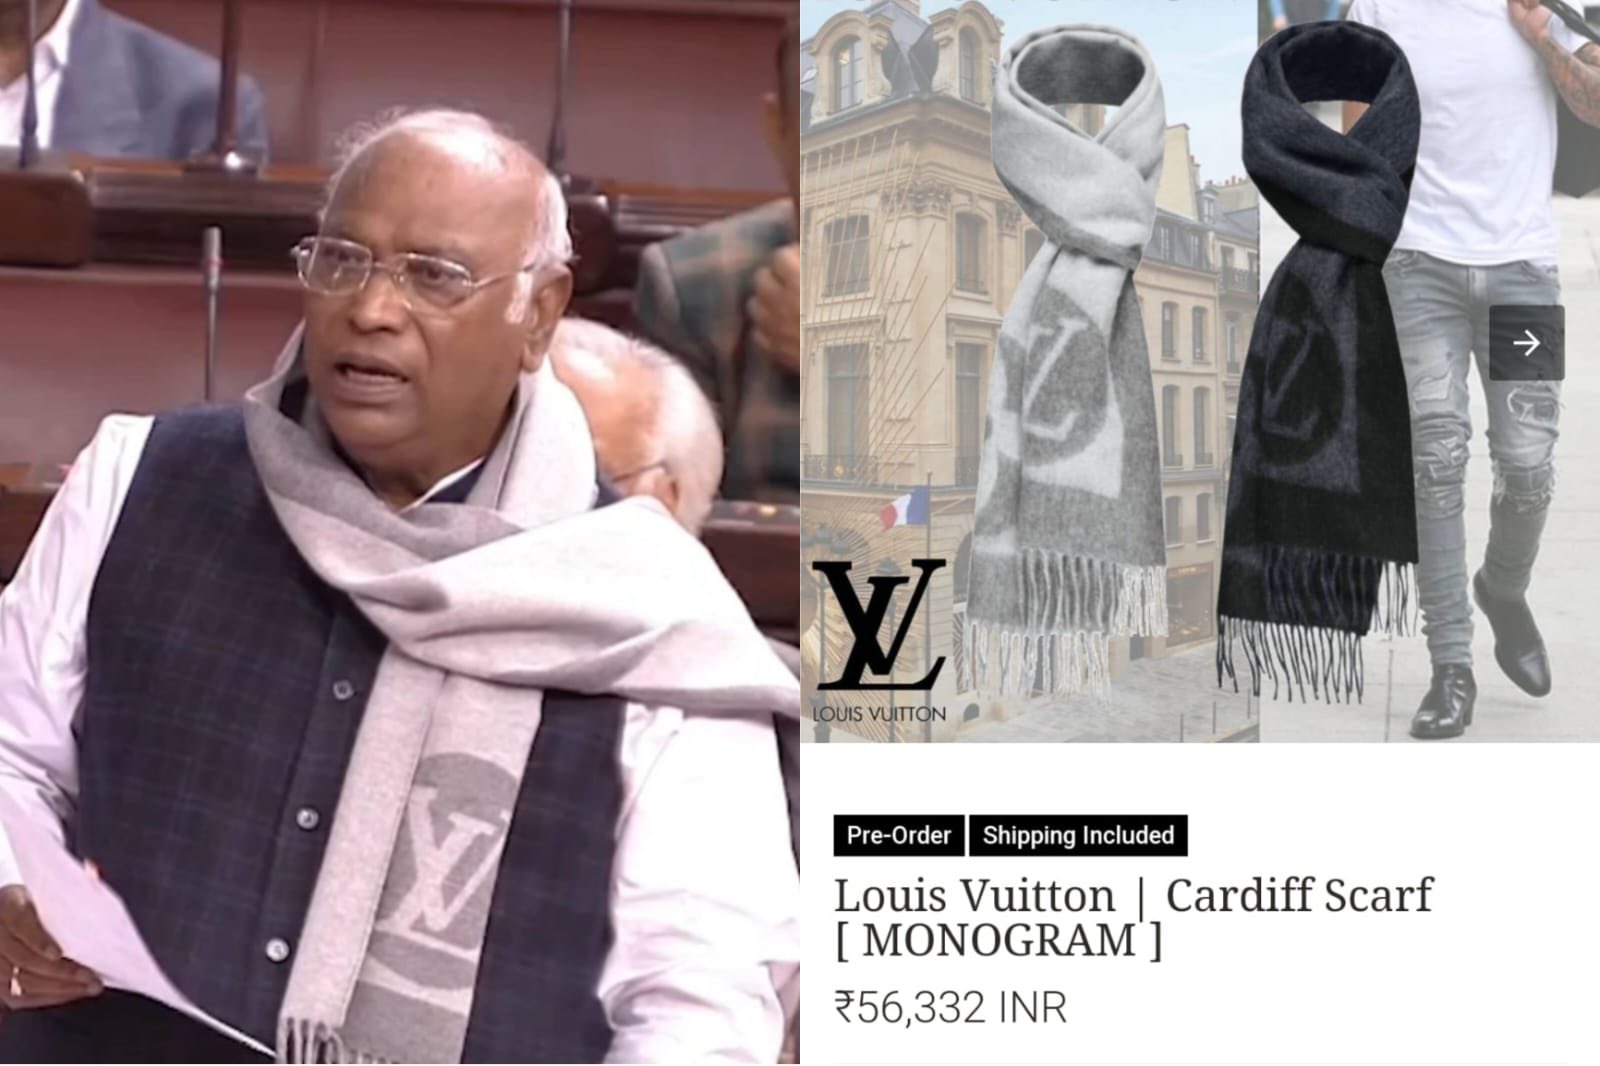 BALA on X: Kharge is questioning other people's income and he himself is  wearing Louis Vuitton Muffler worth Rs 56,000. Hypocrisy!   / X